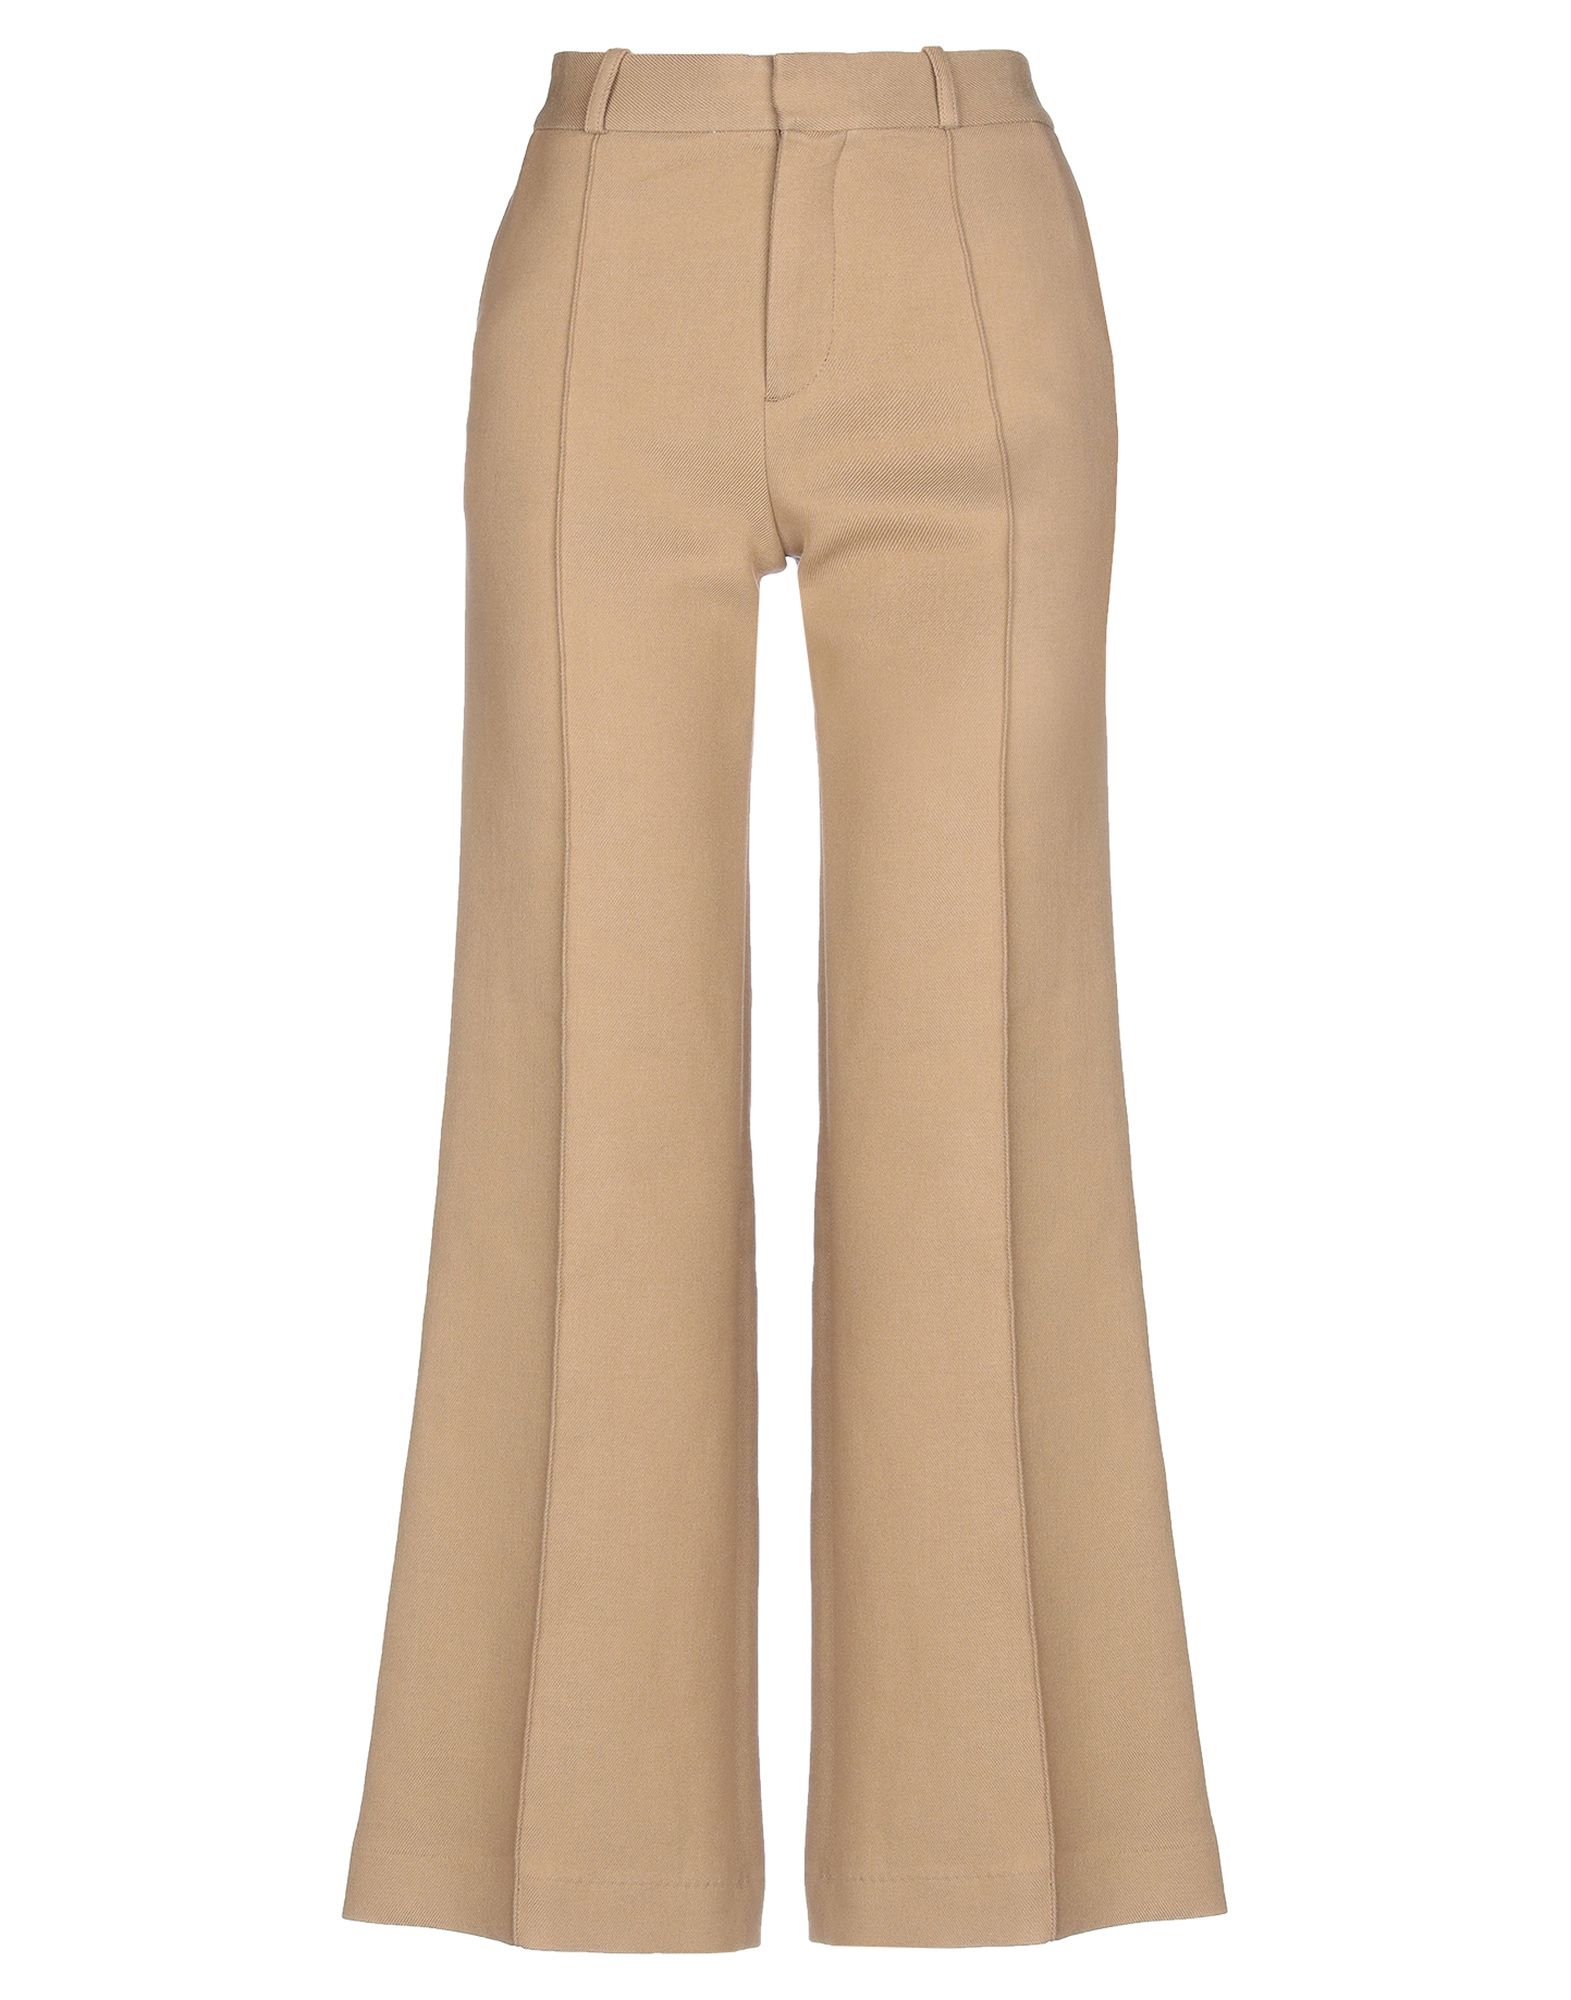 SEE BY CHLOÉ Casual pants,13220149QX 3